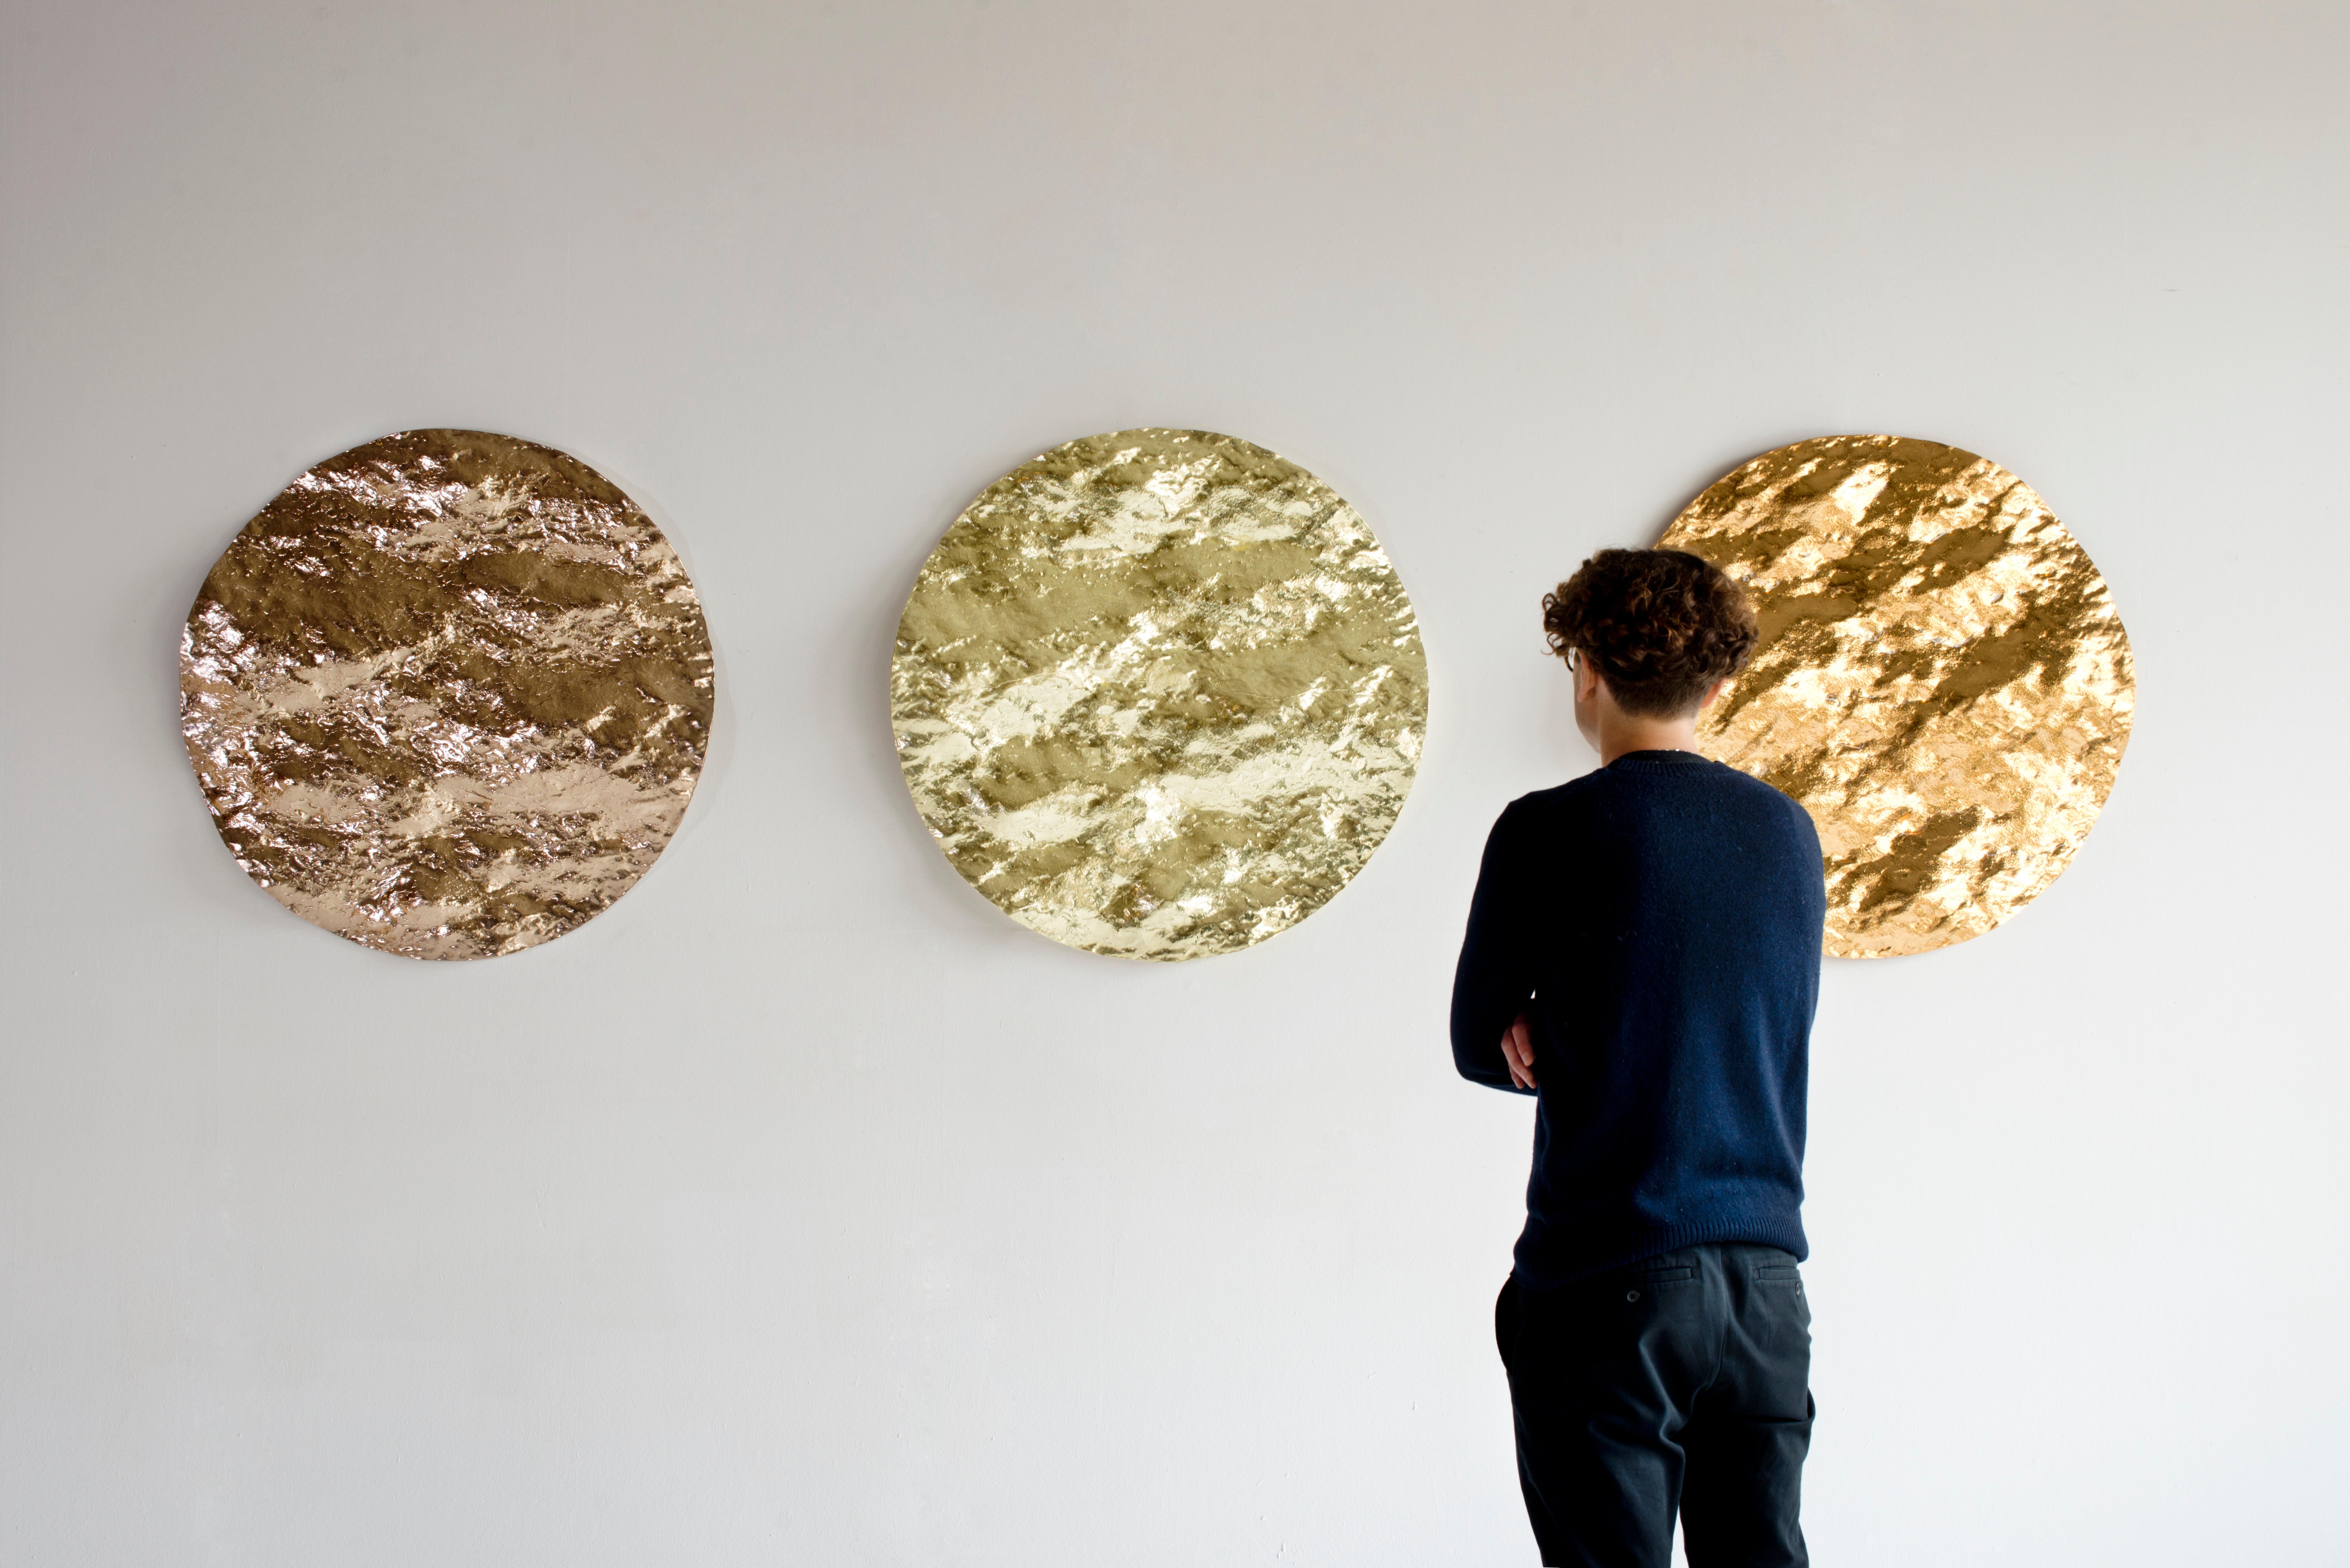 Ocean Sunset #3 -abstract textural round mural glass sculpture with gold leaves  - Painting by Damien Gernay